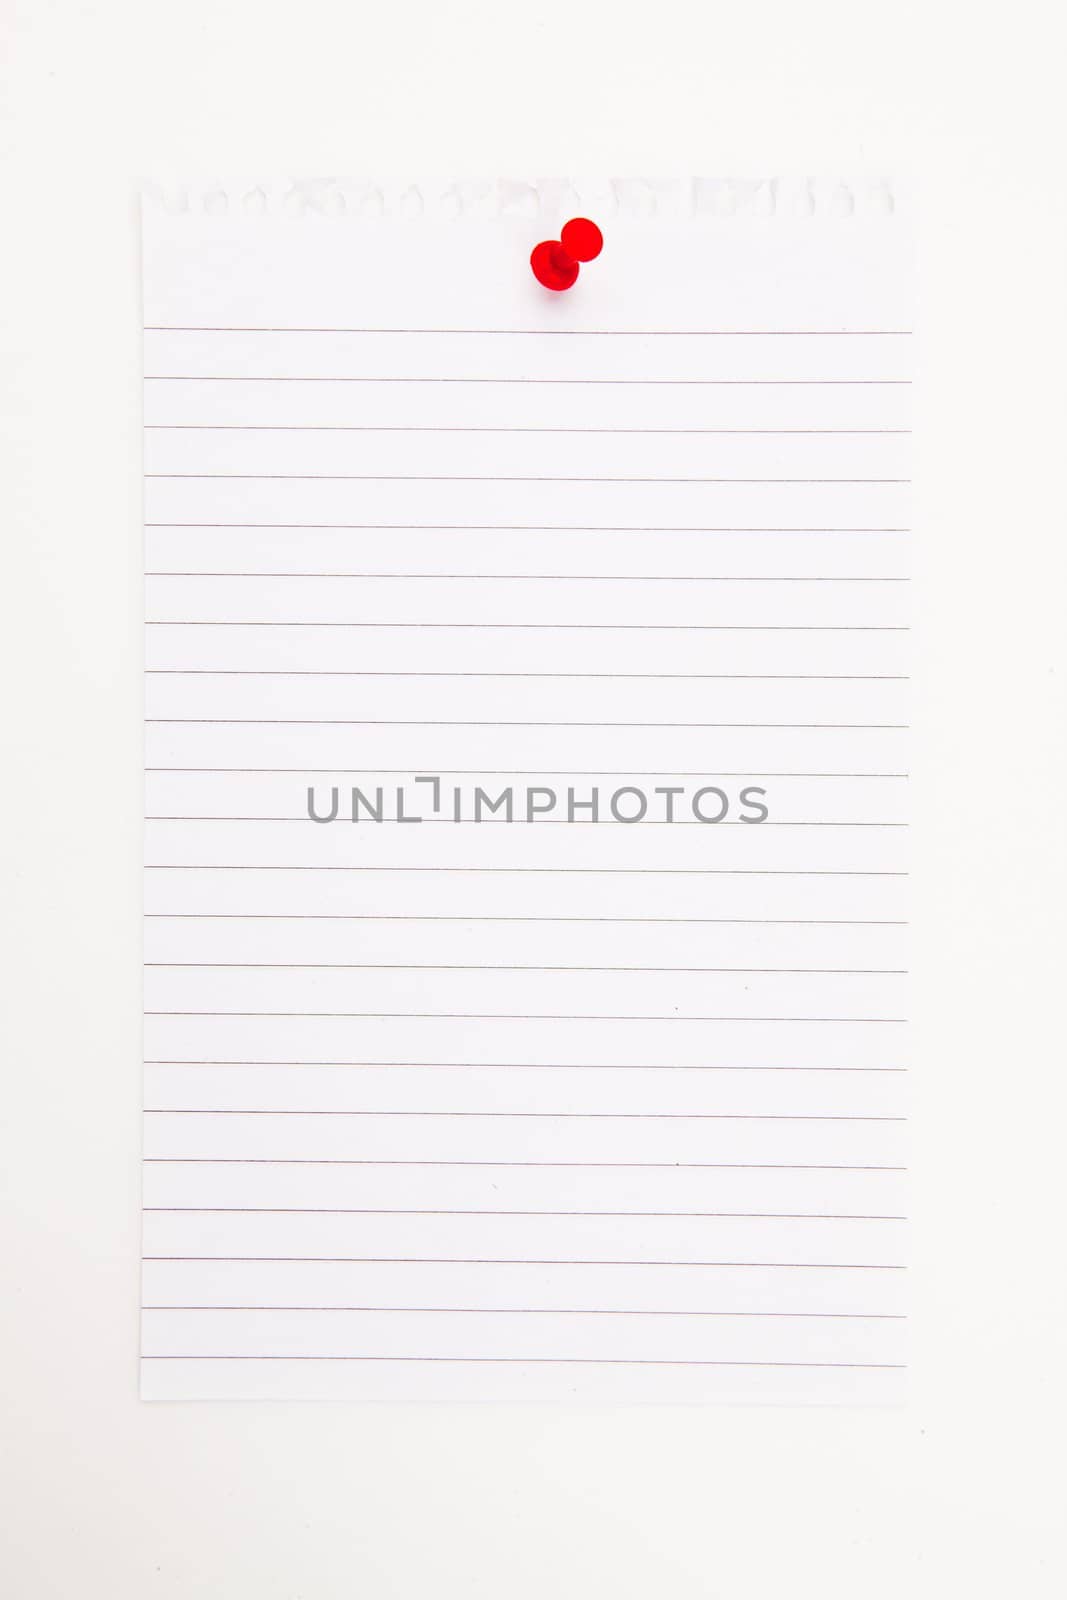 Blank page with red thumbtack against a white background